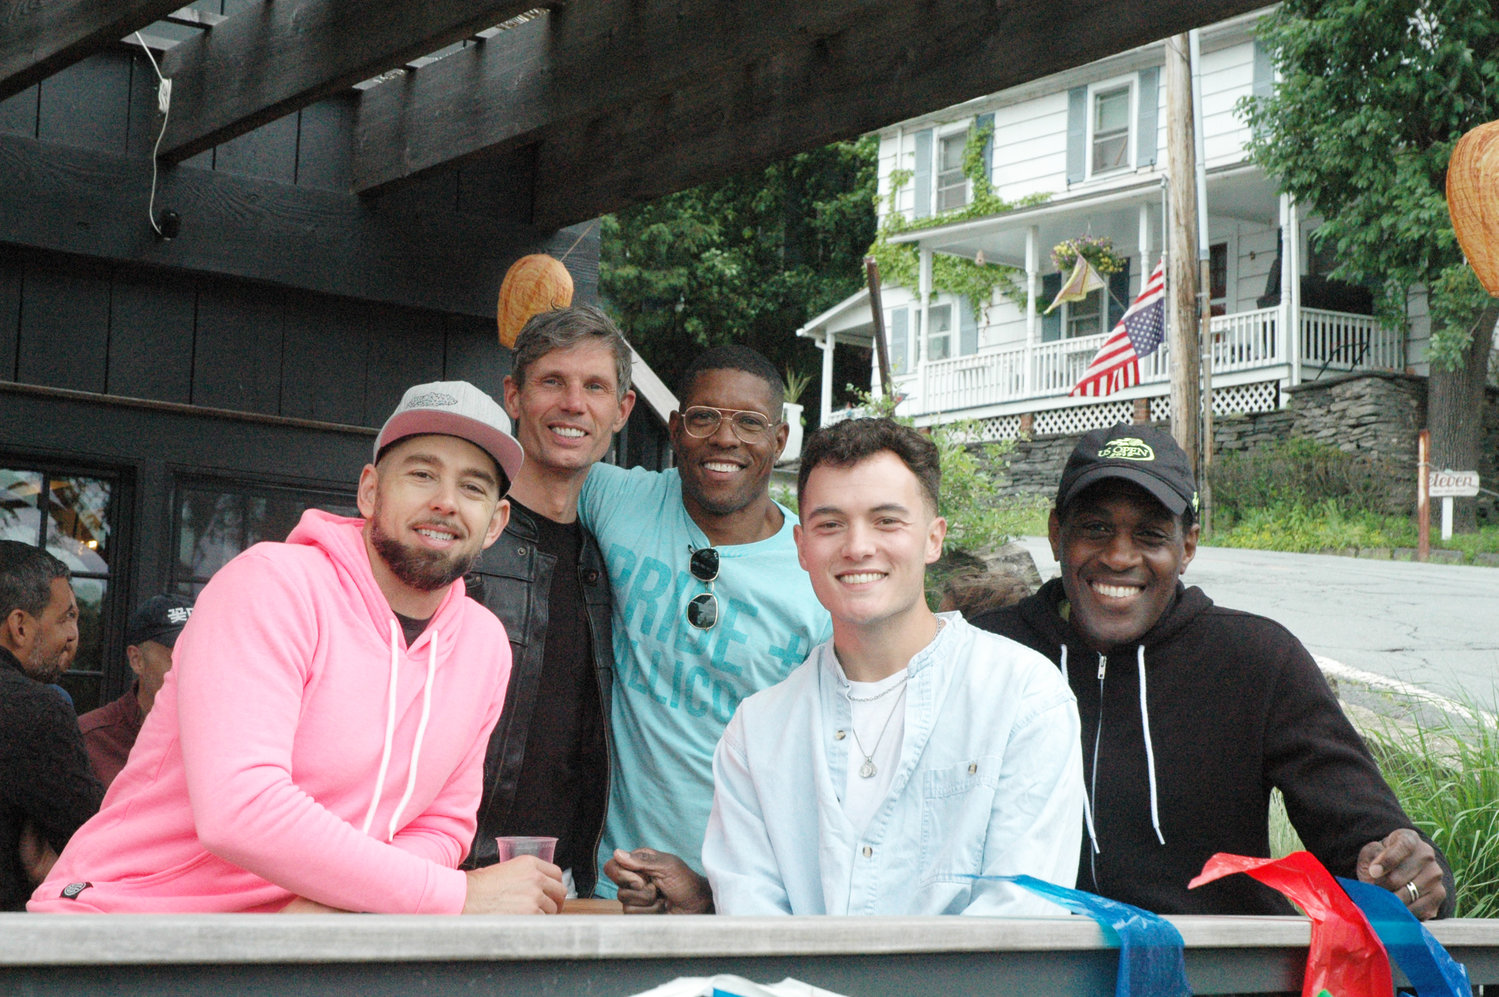 Catskills Pride President Dwayne Brown, center, enjoying the day with Pride attendees. From left, David Vallee, Mathew Dempsey, Harrison Sage, and Michael Givens.